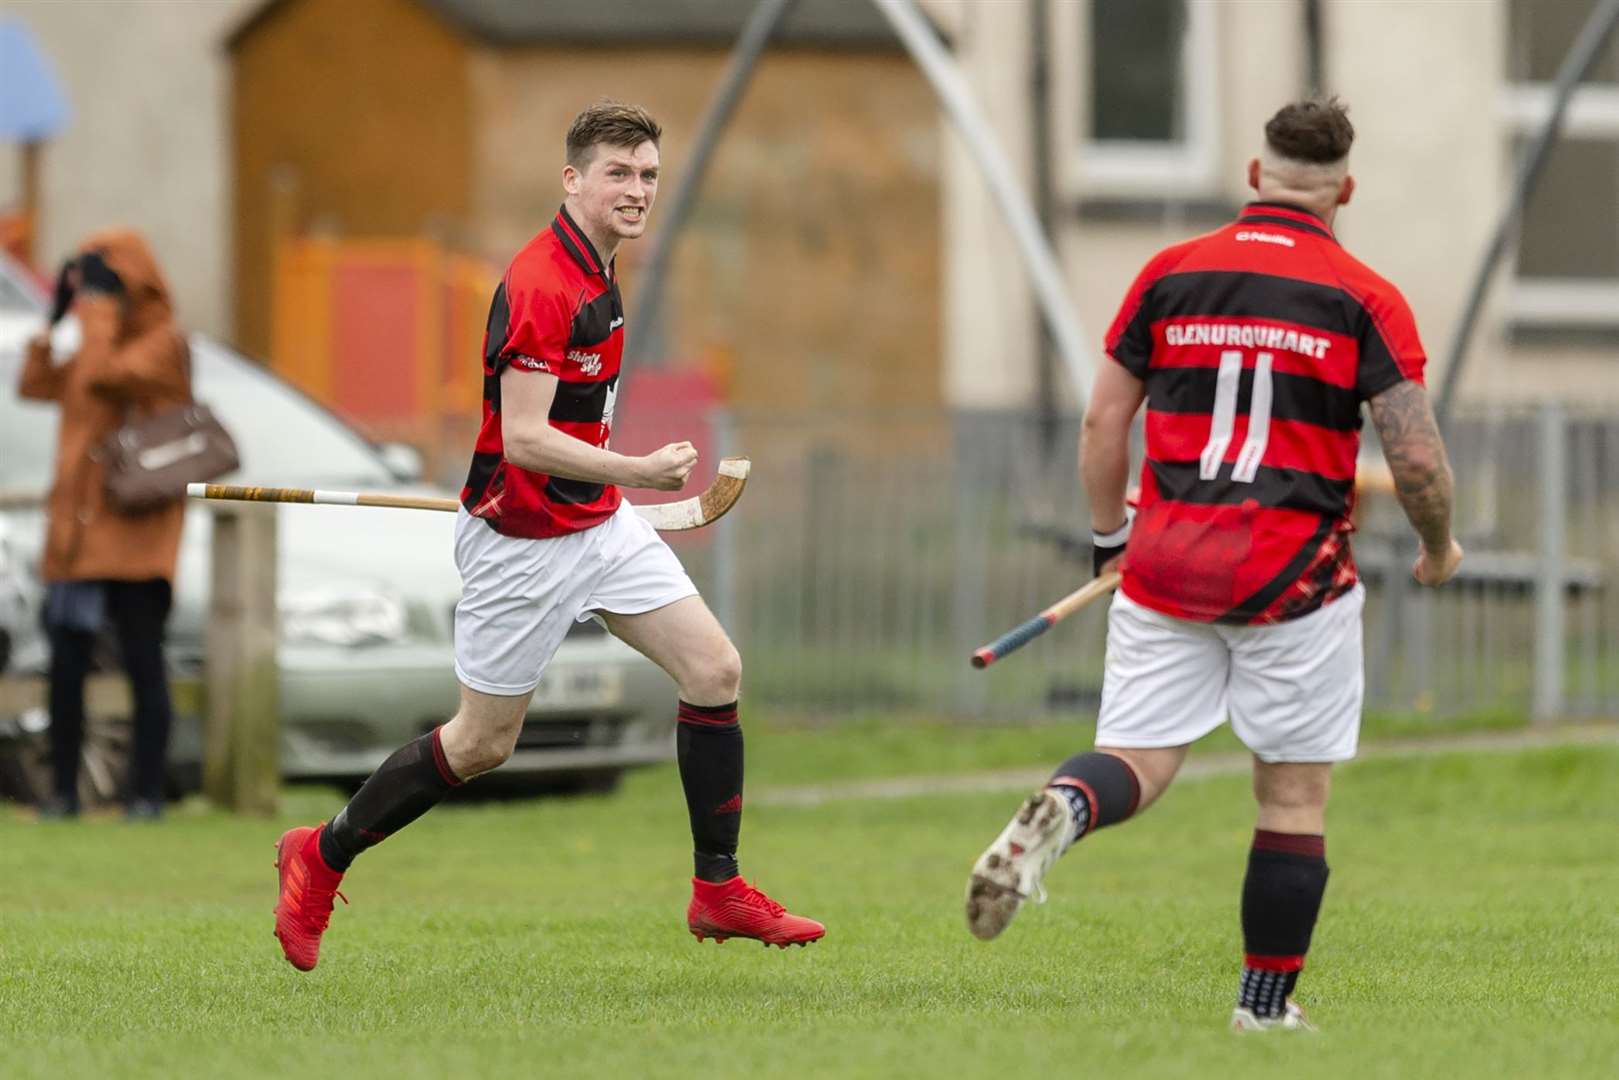 Connor Golabek of Glenurquhart (left) will face Strathglass in the semi final of the MacTavish Cup.